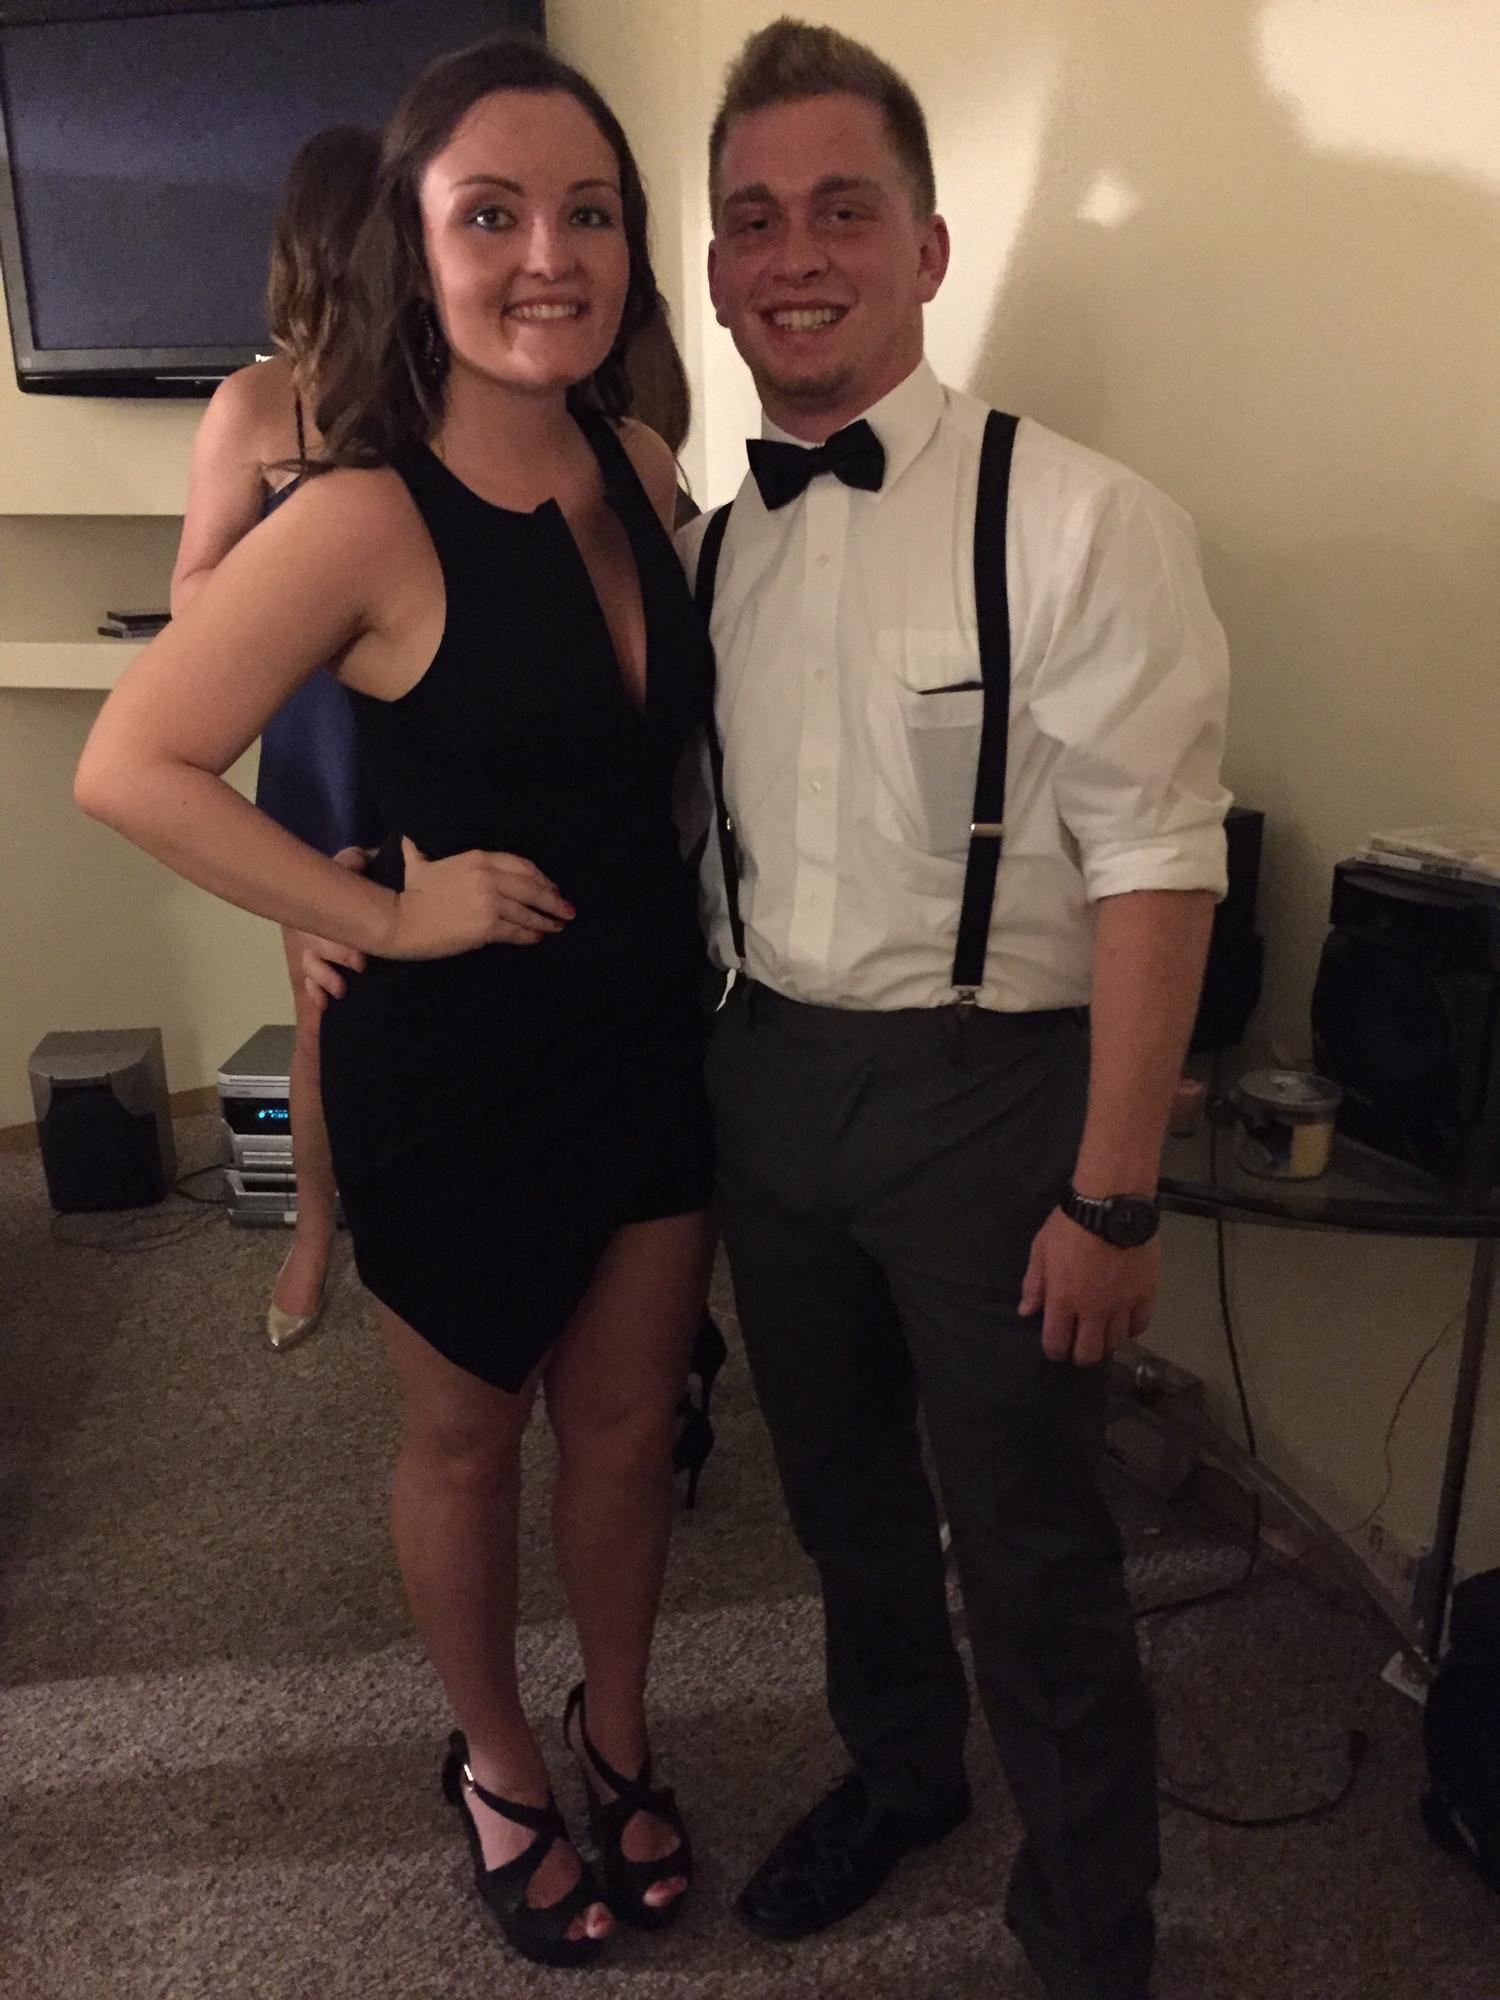 Our first official date to my sorority formal. Fun fact, Ross saved Hannah’s name tag in his wallet from that night for almost 5 years until it went through the washing machine.